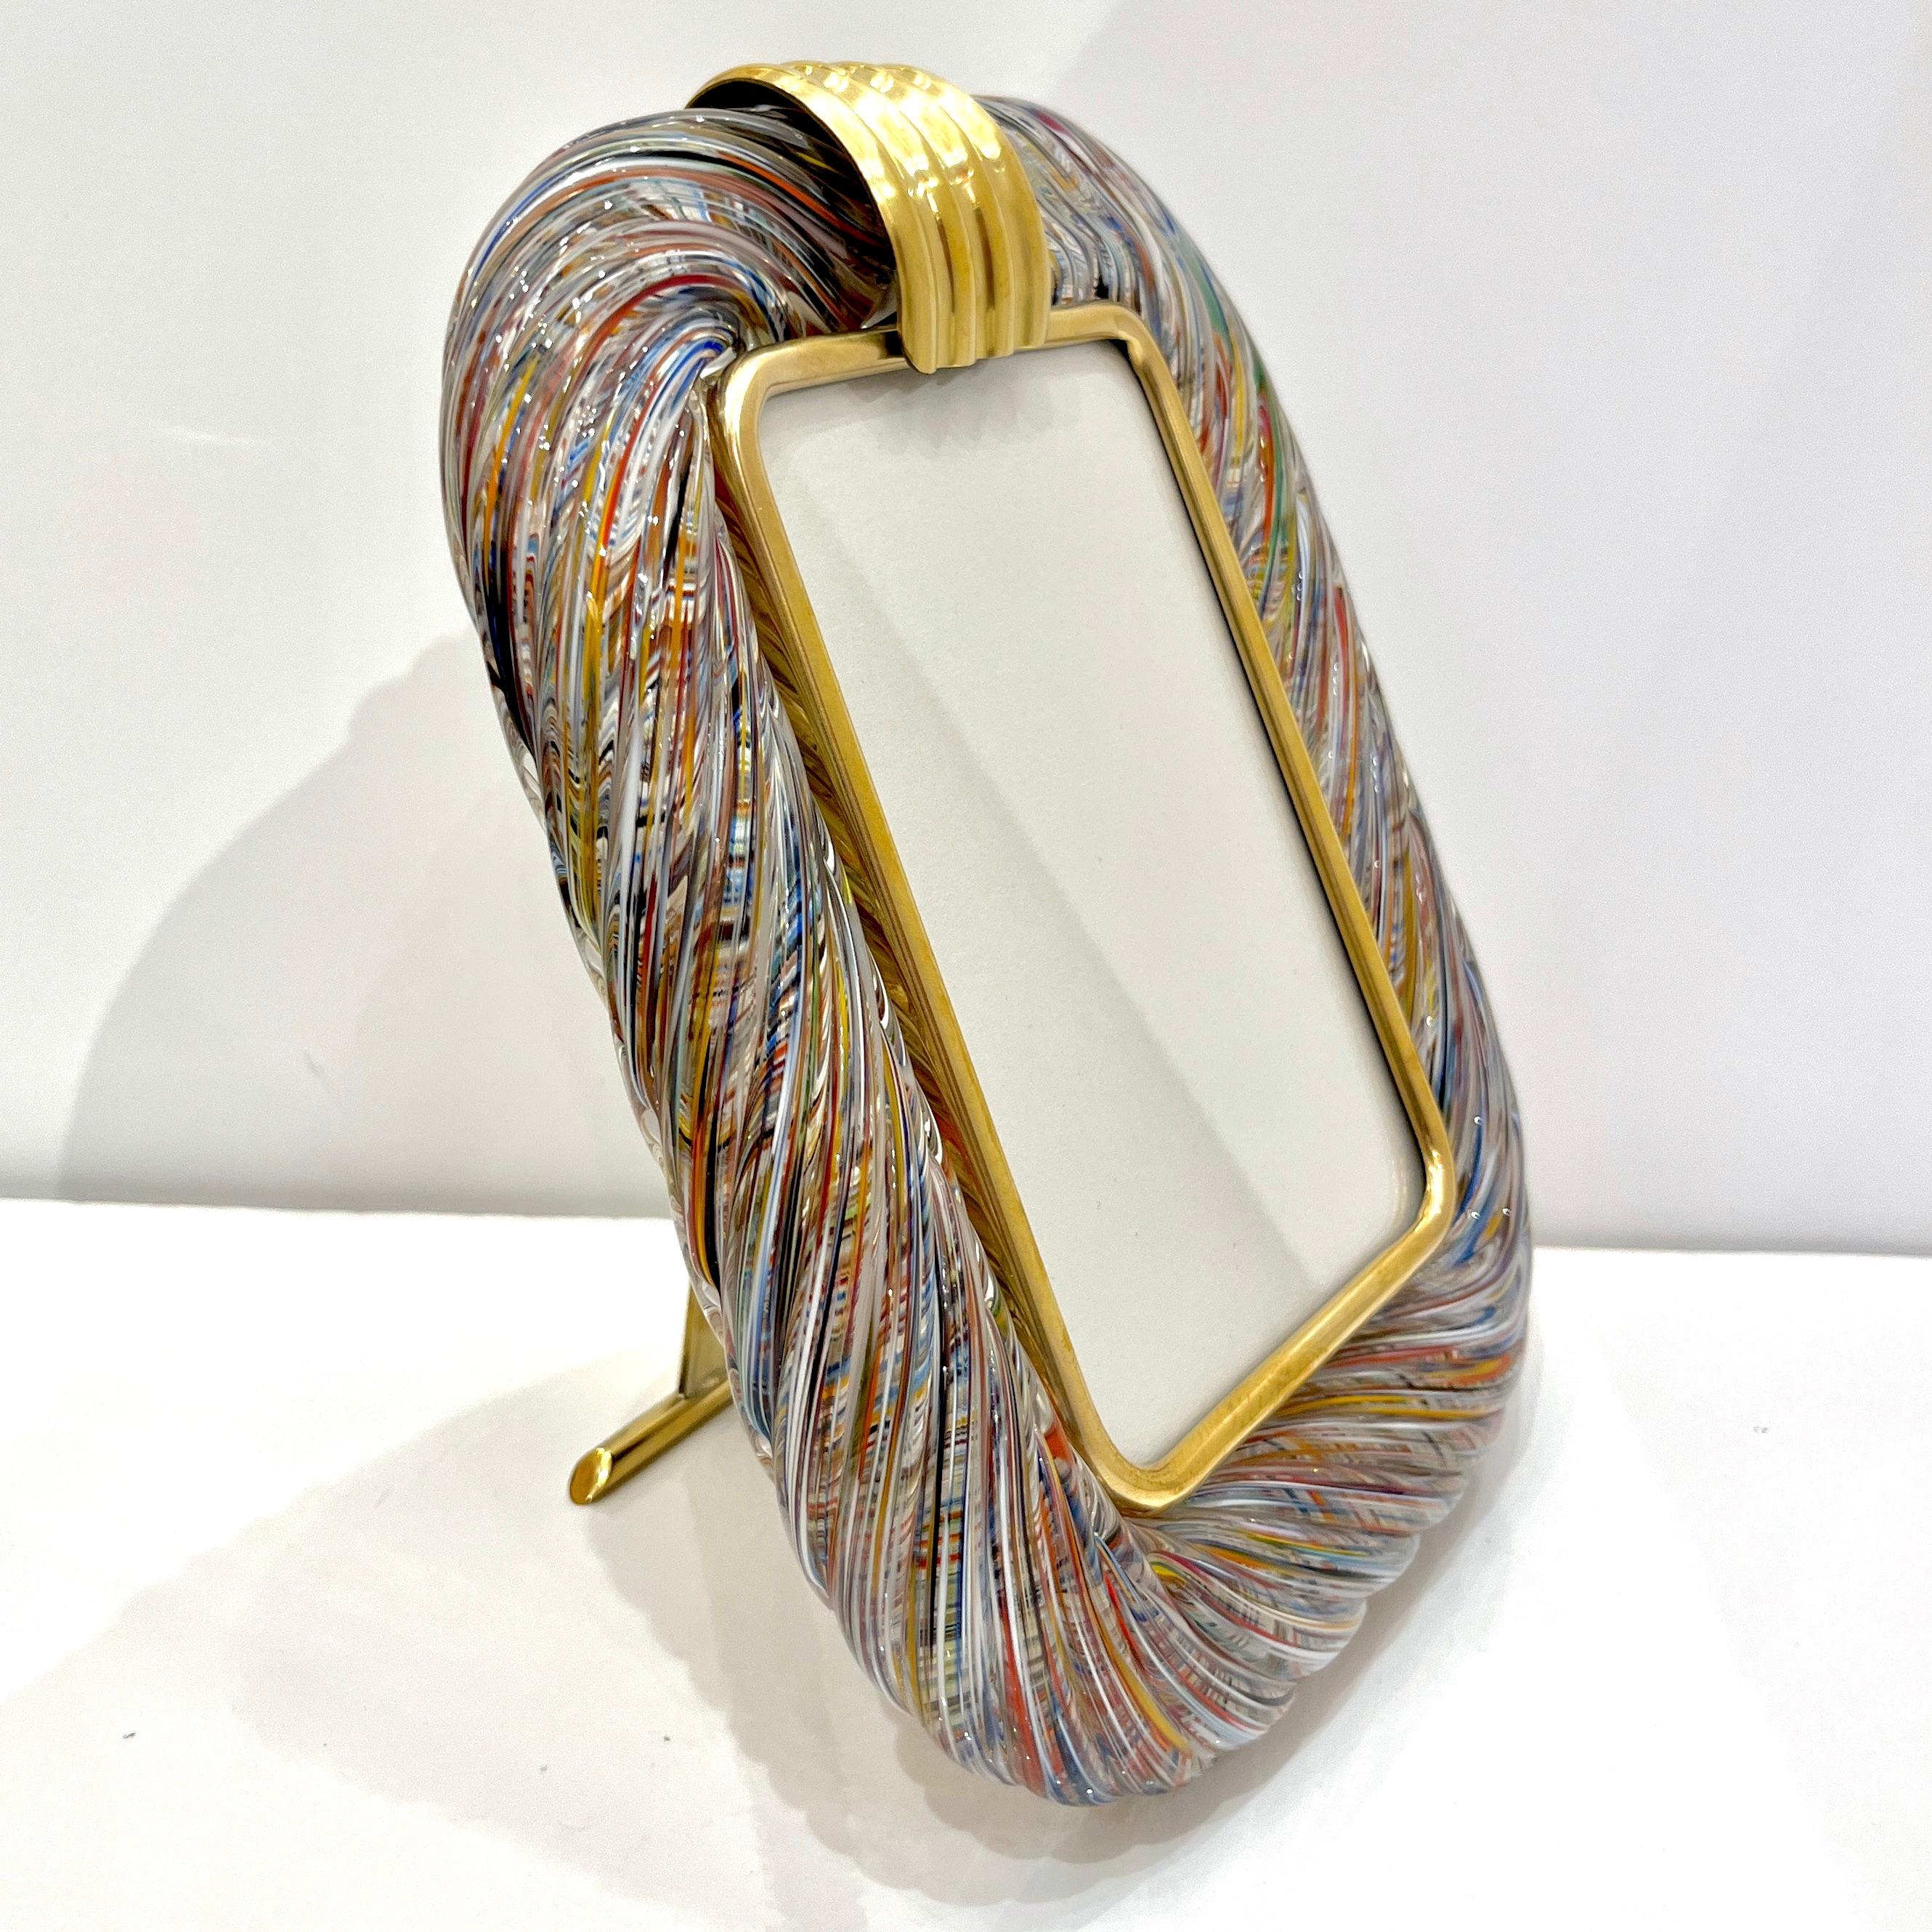 21st century modern sophisticated and elegant contemporary picture frame in thick blown Murano glass: the crystal clear glass frame worked with “torchon” technique, handcrafted twisted blown Murano glass that amplifies the reflections, is